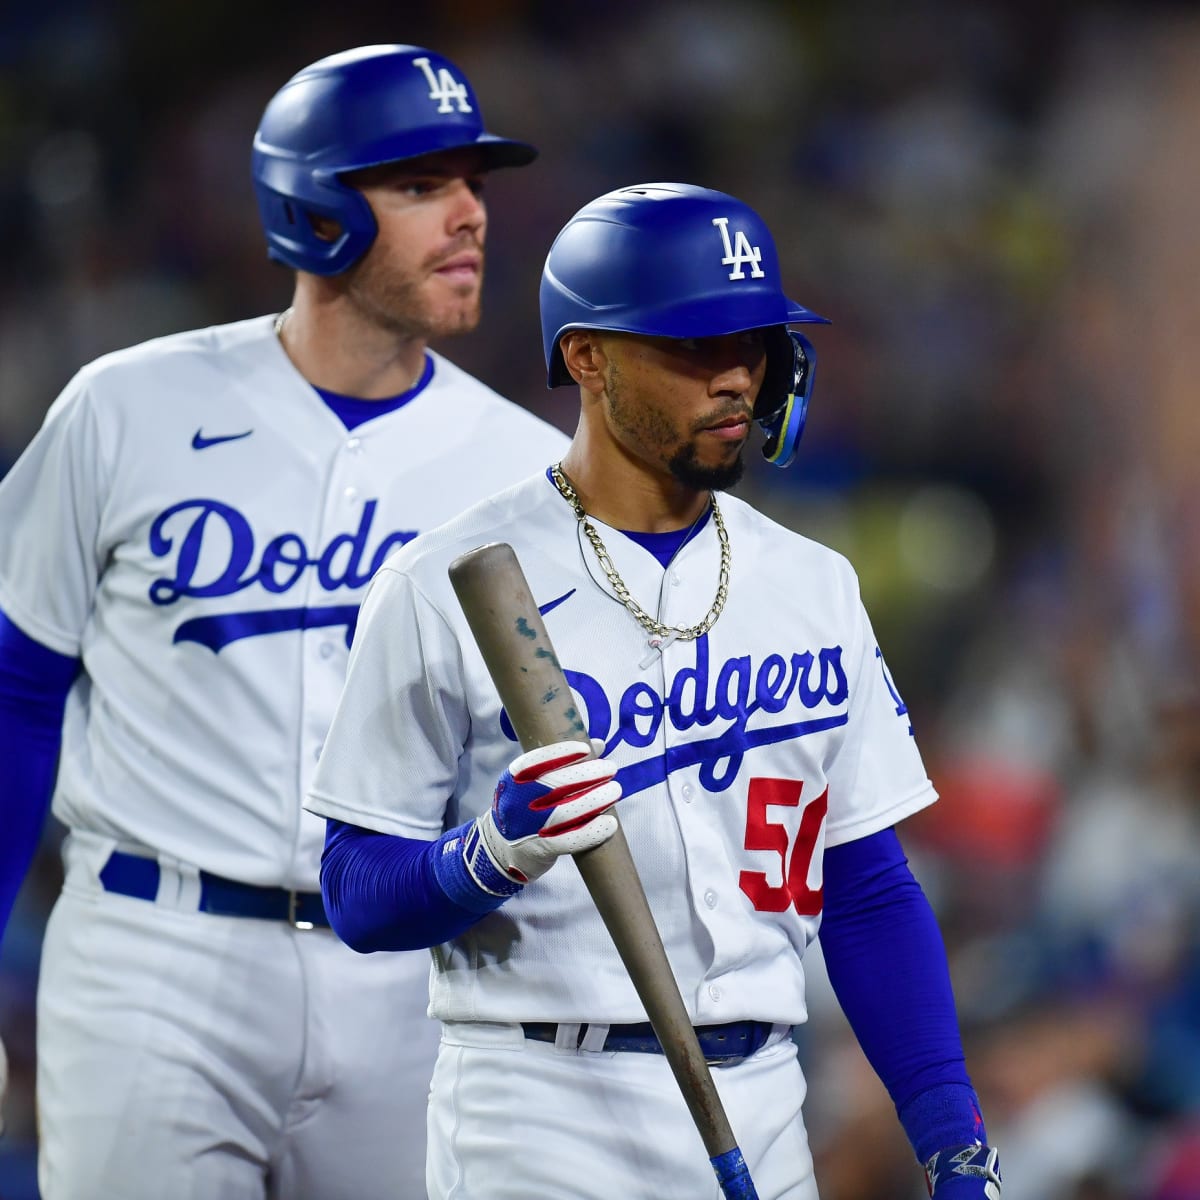 Dodgers fans want Mookie Betts and Freddie Freeman gone after NLDS